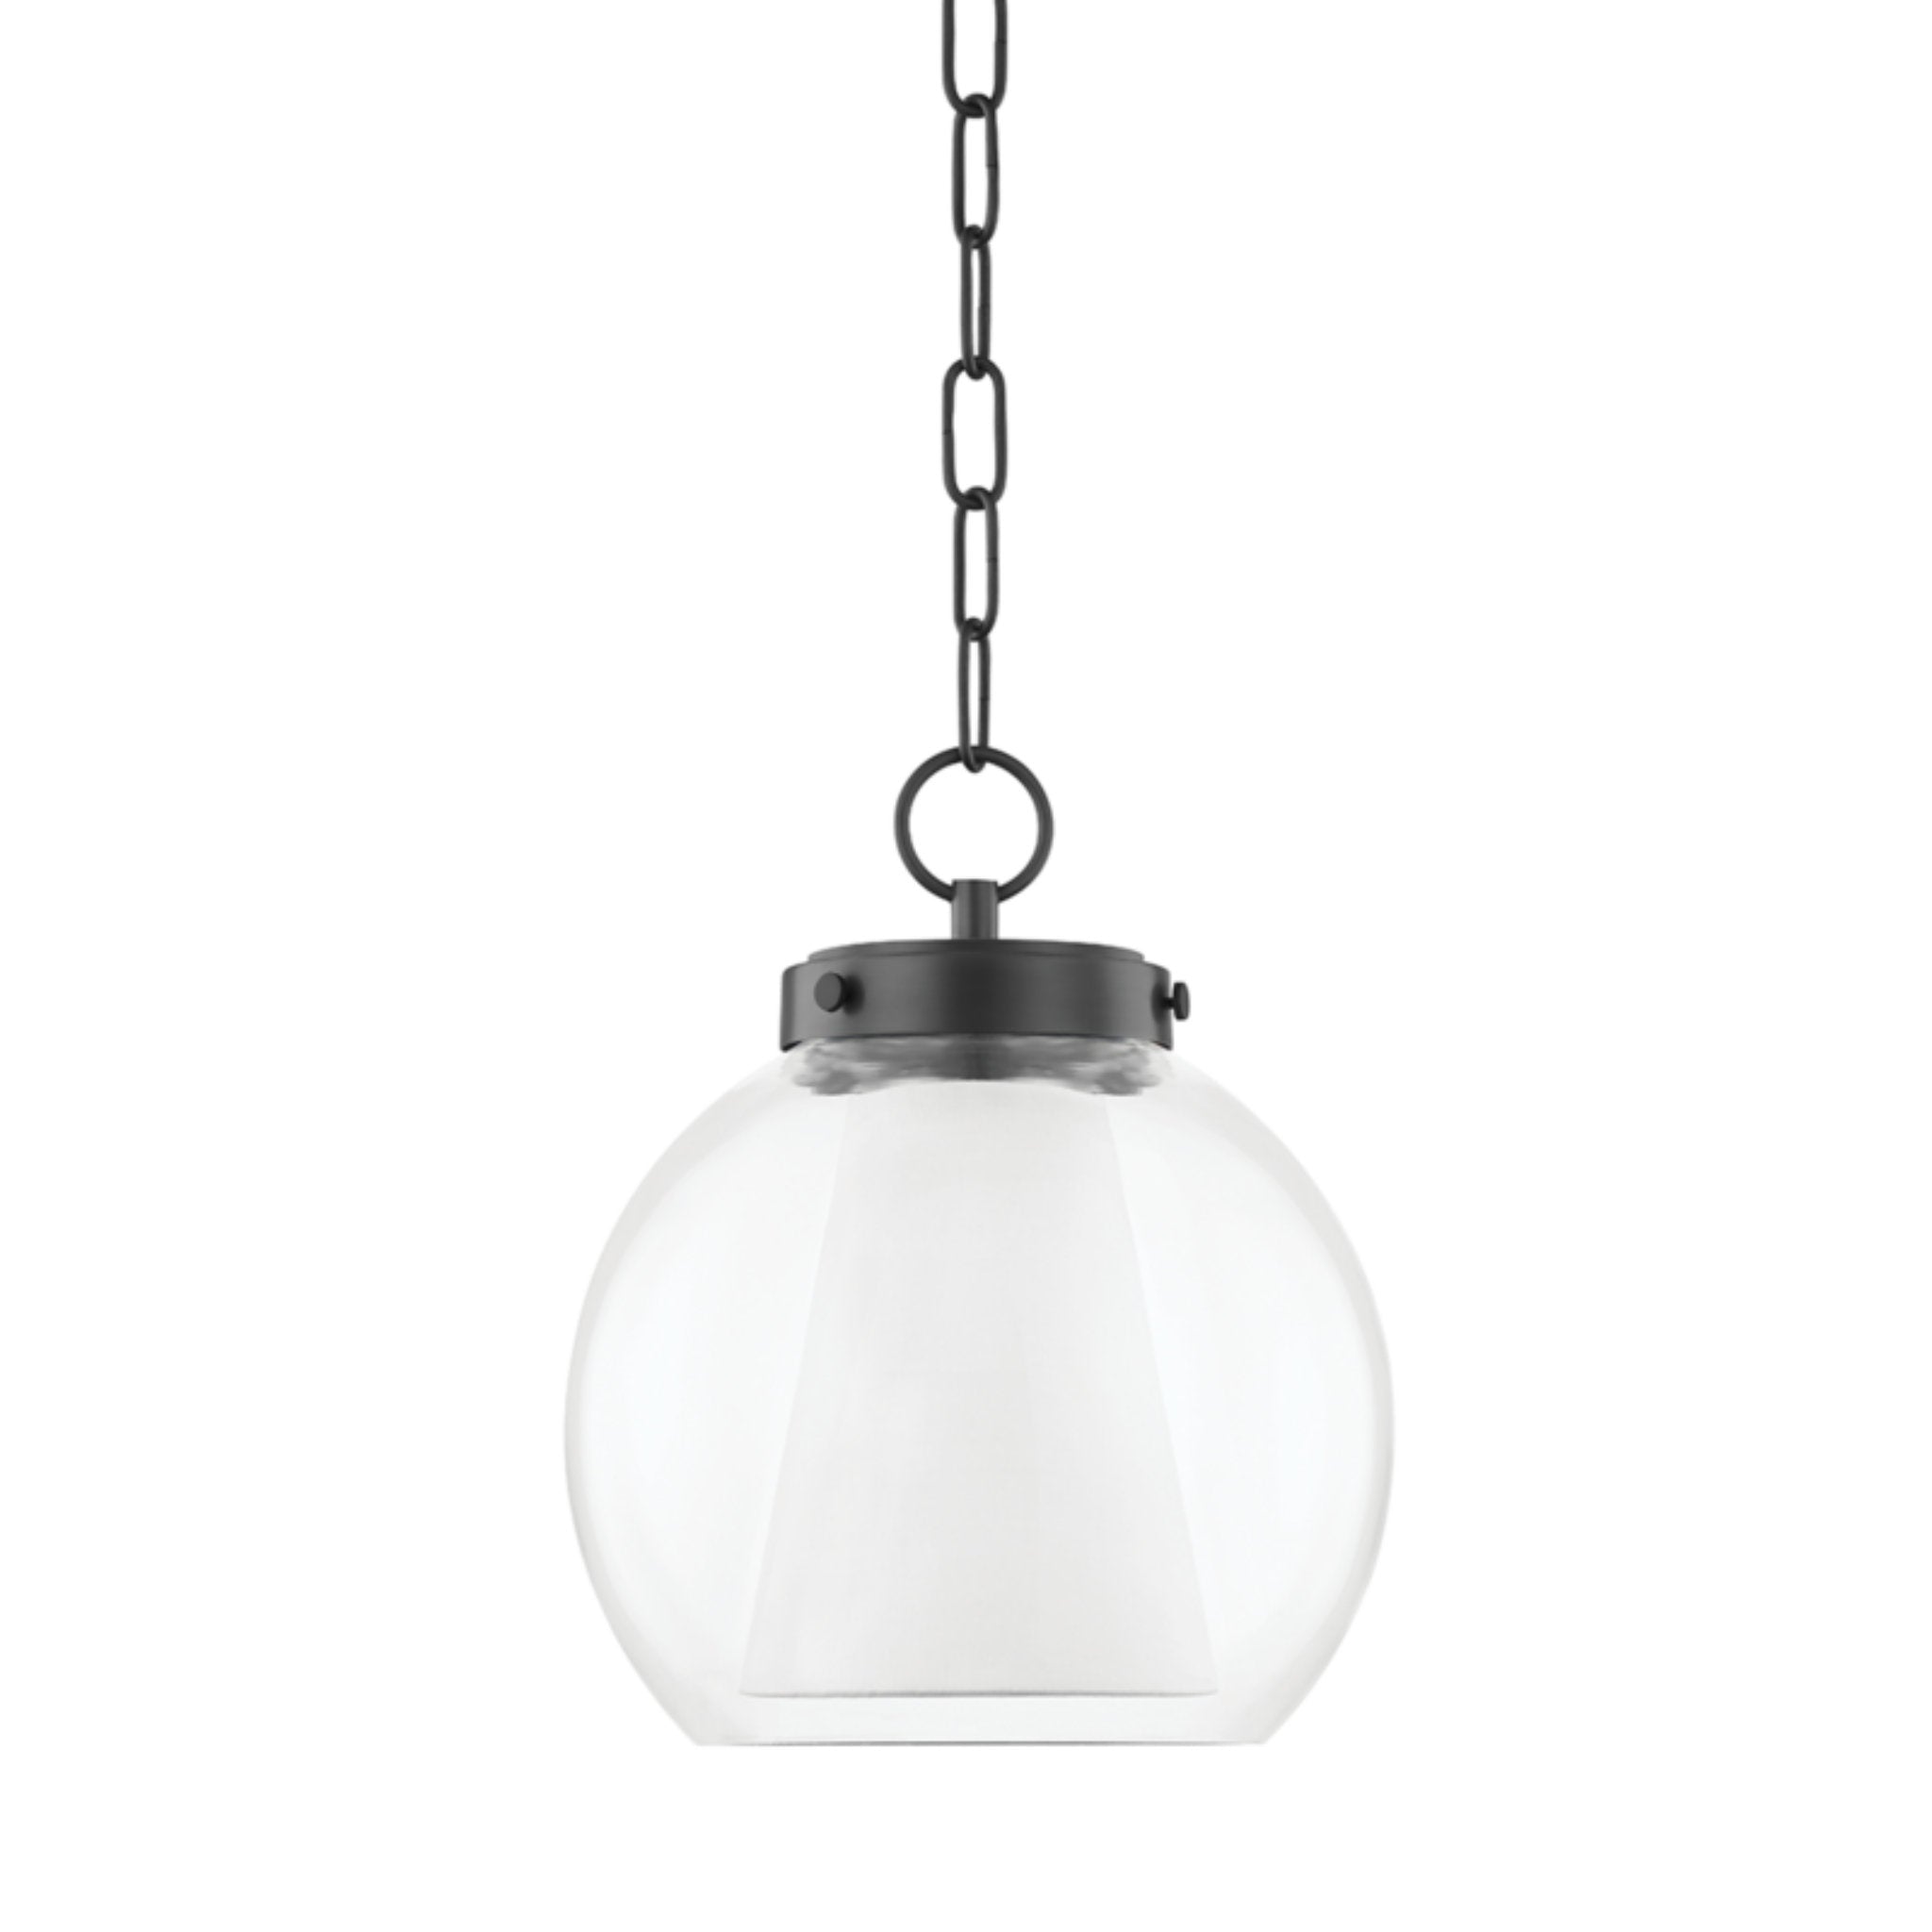 Mitzi by Hudson Valley Lighting H457701S-OB 1 Light Small Pendant in Old Bronze Open Box